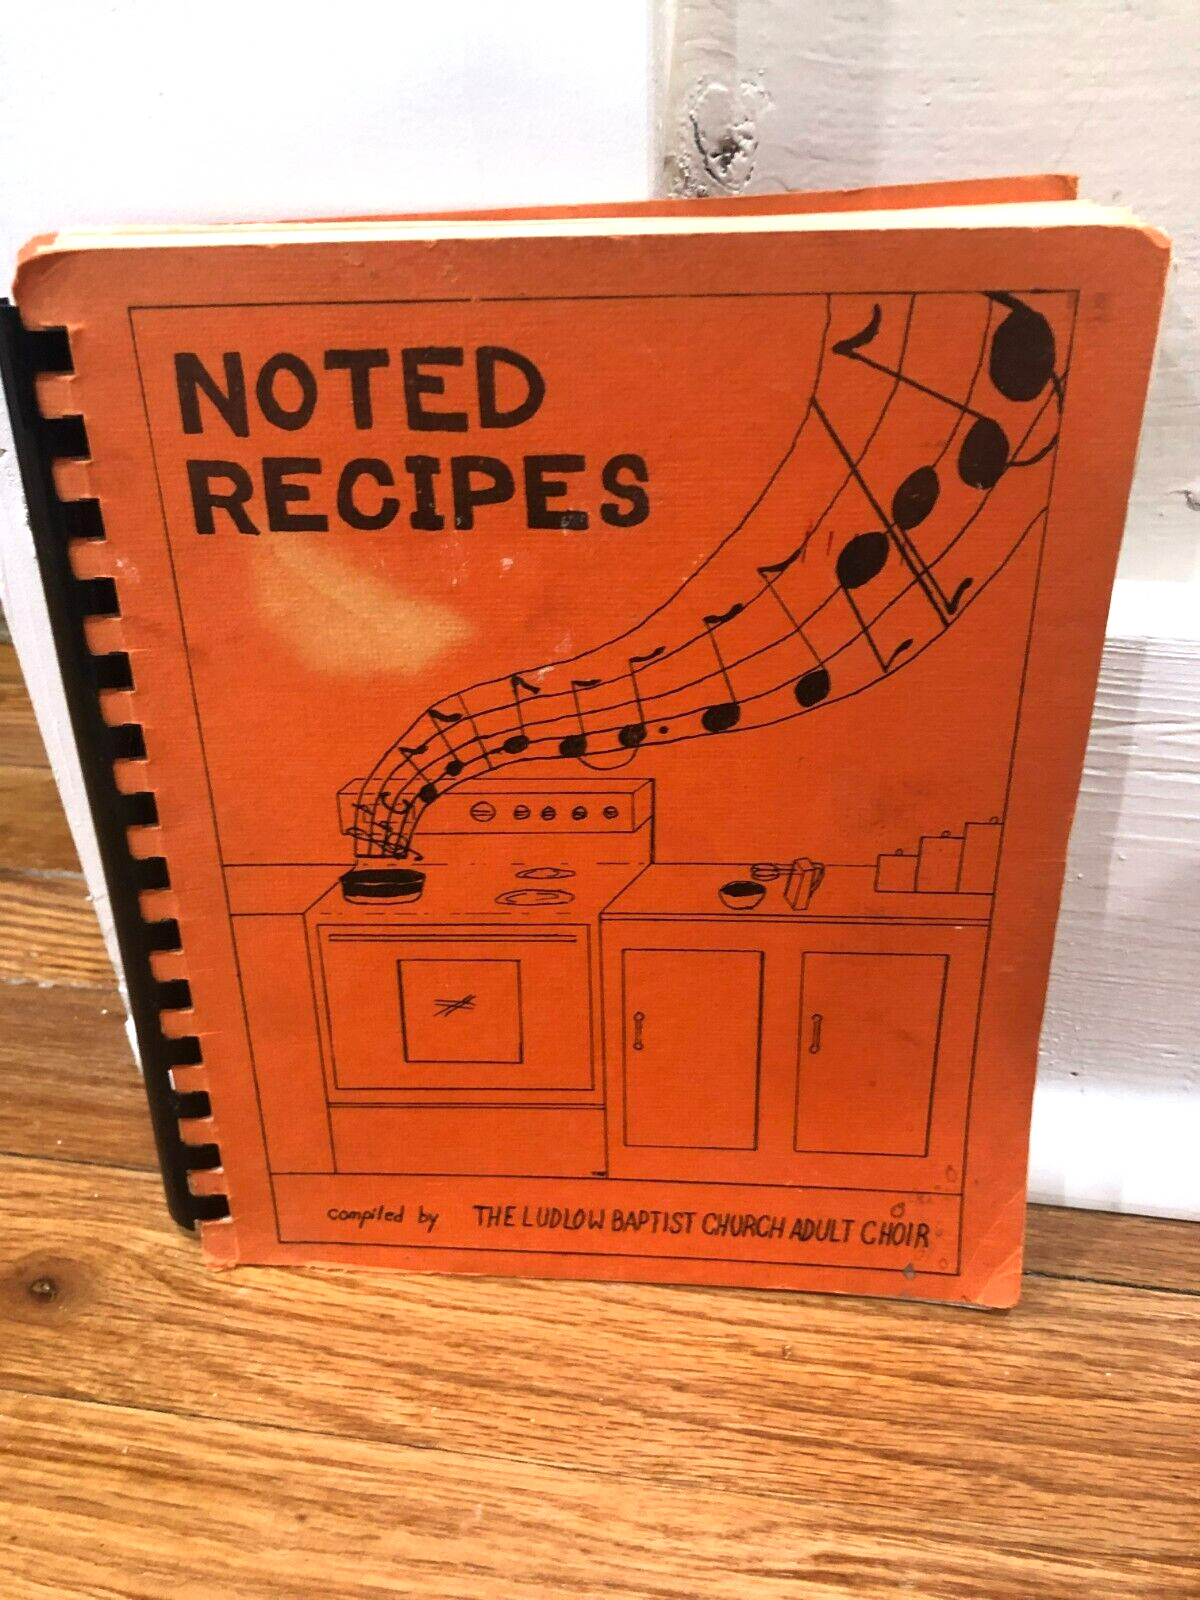 Noted Recipes - Adult Choir Ludlow Ms. Baptist Church Cookbook